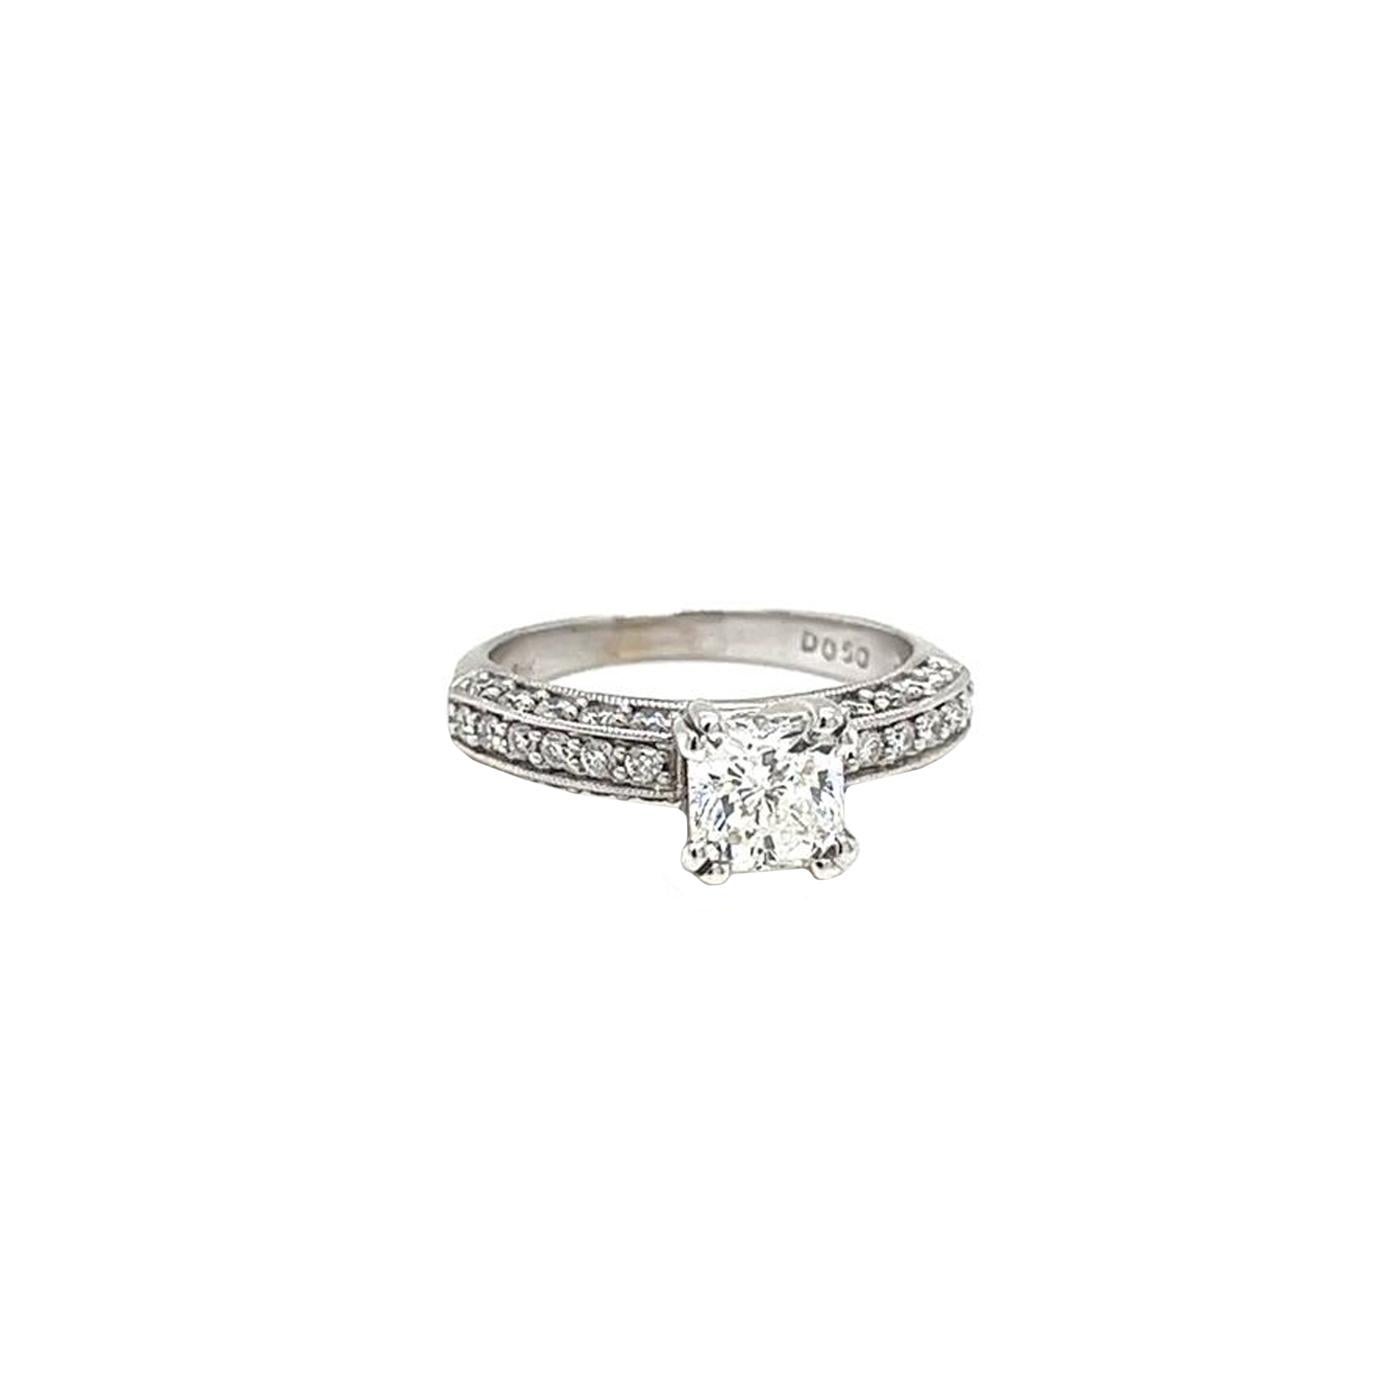 Grace your collection with the breathtakingly stunning, 2.21 Carat Radiant Cut Diamond Ring, IGI Certified. This exquisite piece, masterfully created with 18K Yellow Gold, portrays an expression of elegance and sophistication. It features a